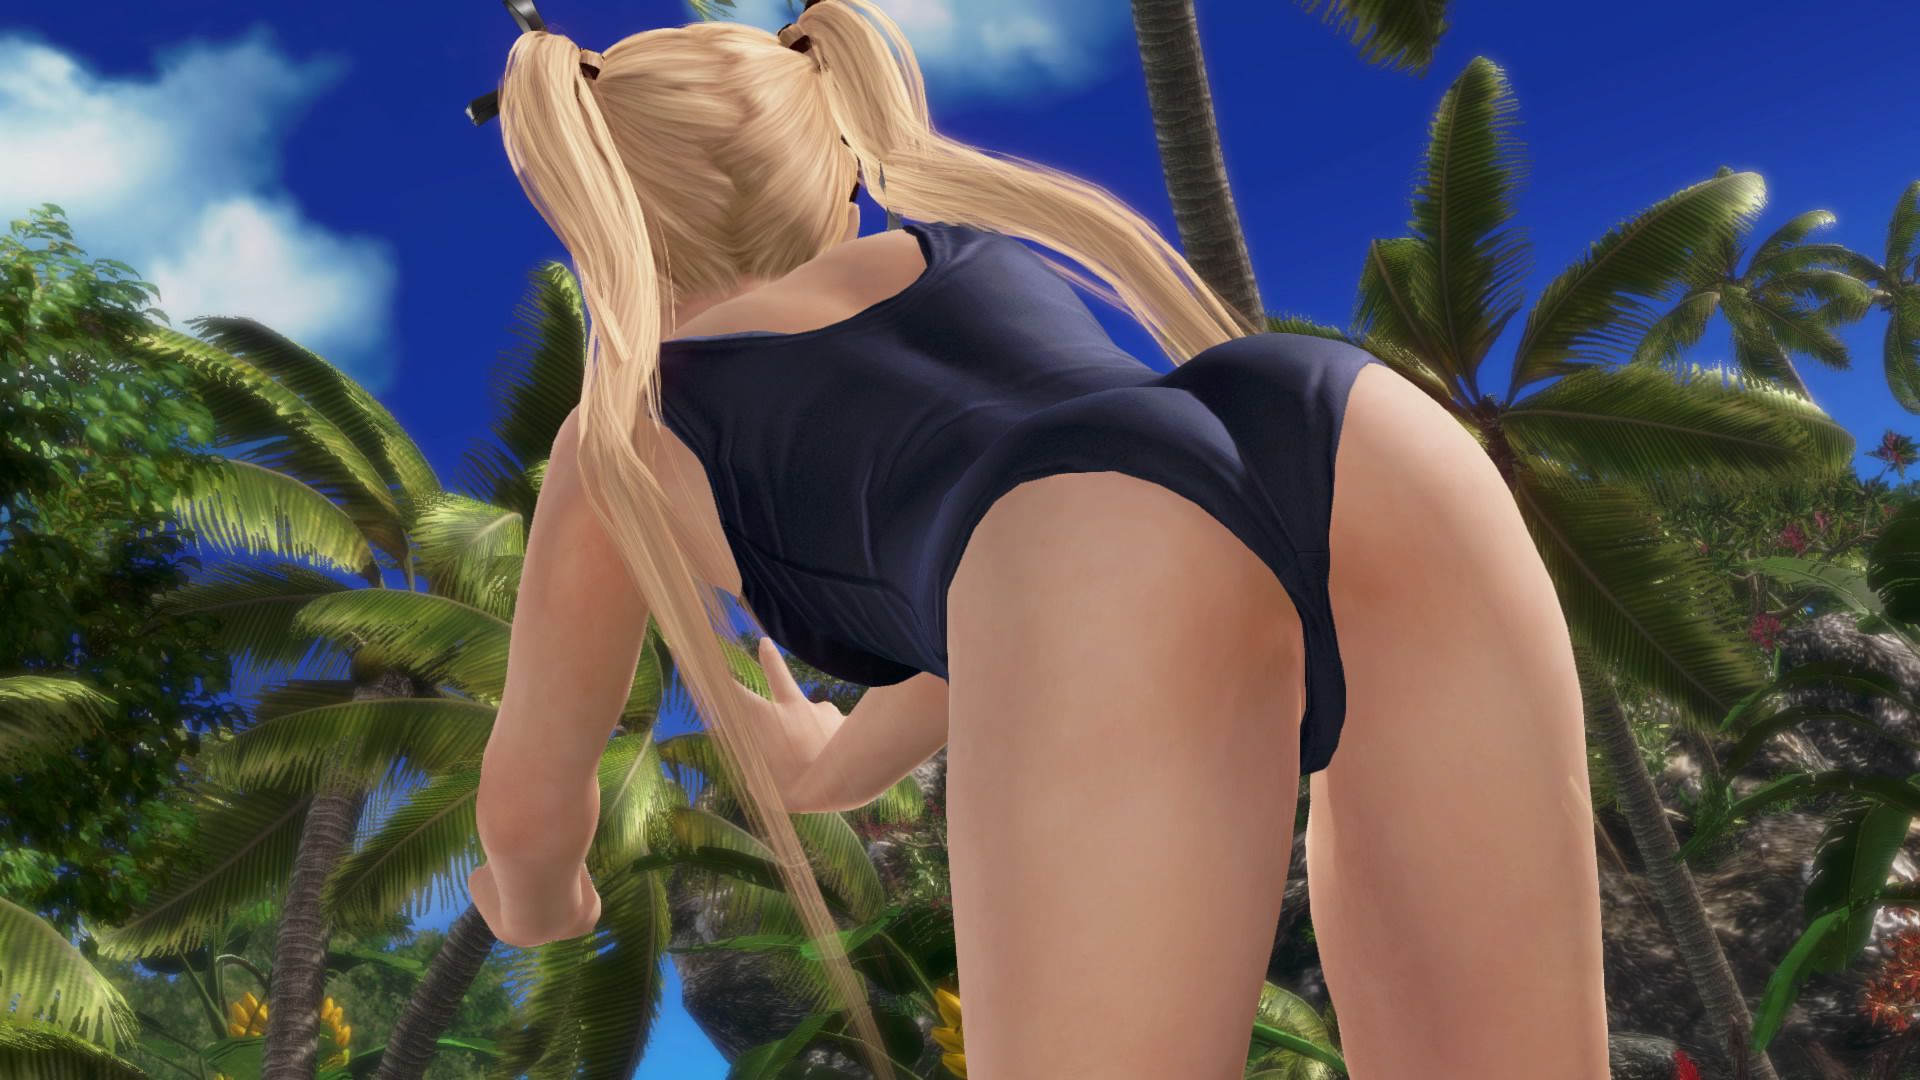 DOAX3 recommend private shooting Association (Division of Rose-Marie) in swimsuit 24